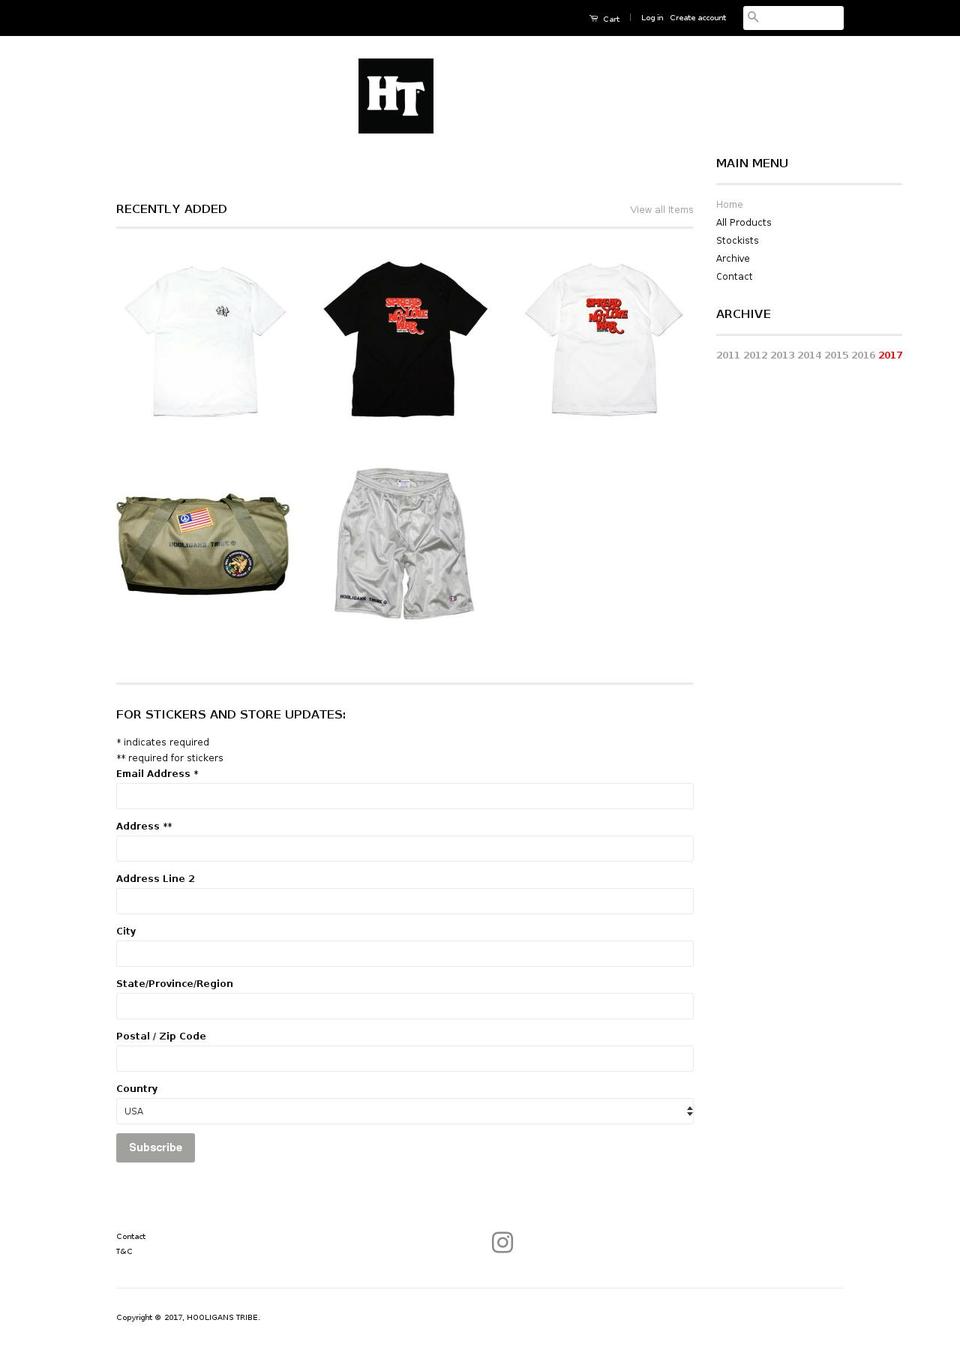 Simple Shopify theme site example hooliganstribe.com